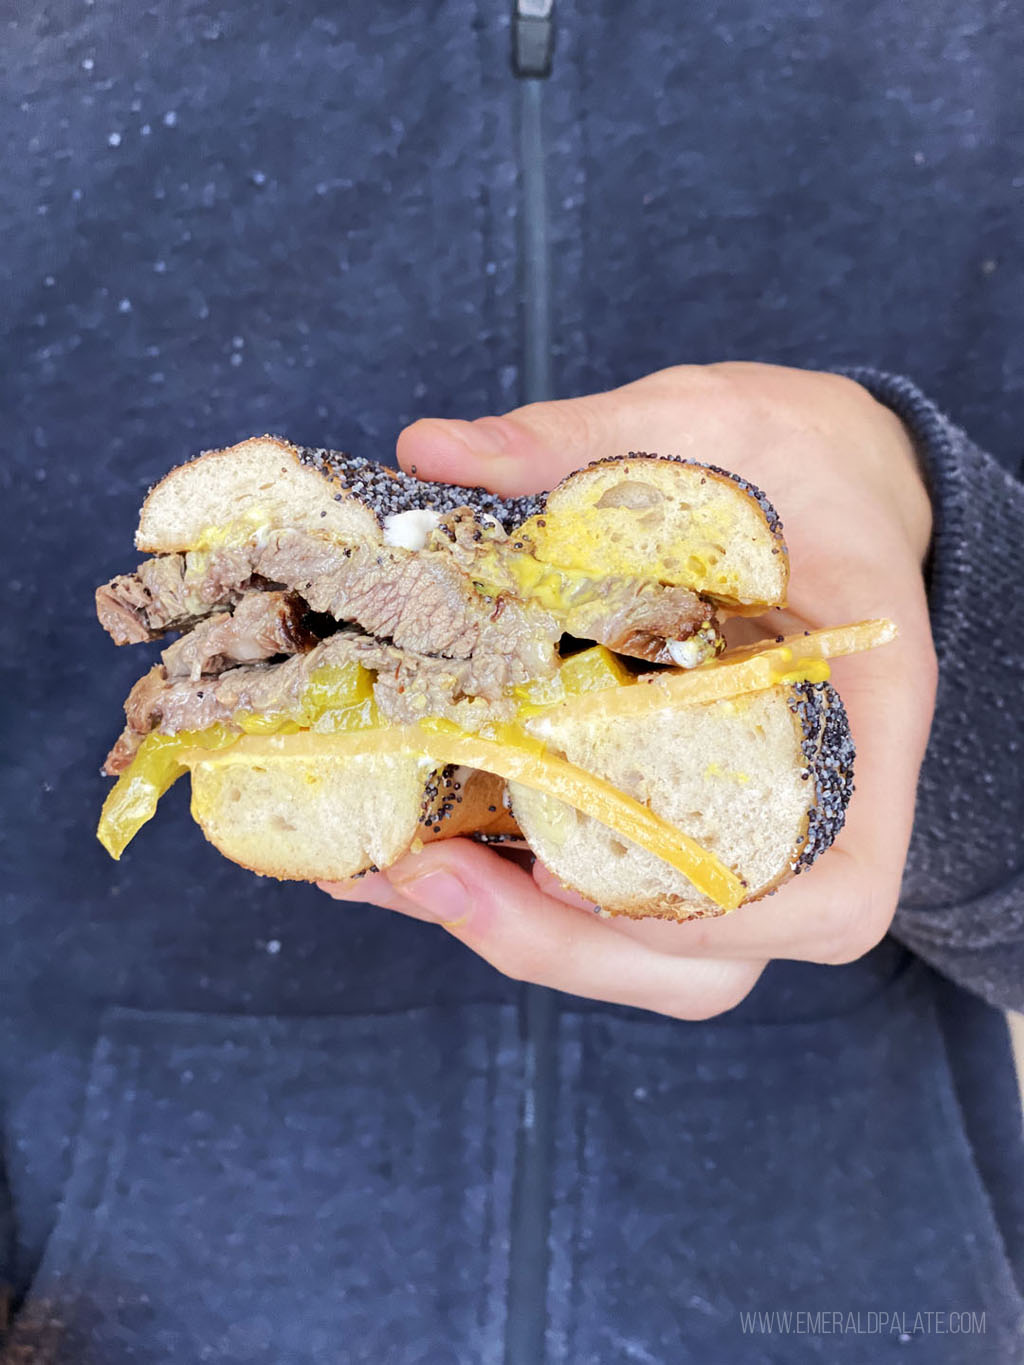 person holding half of a bagel sandwich with corned beef and cheese